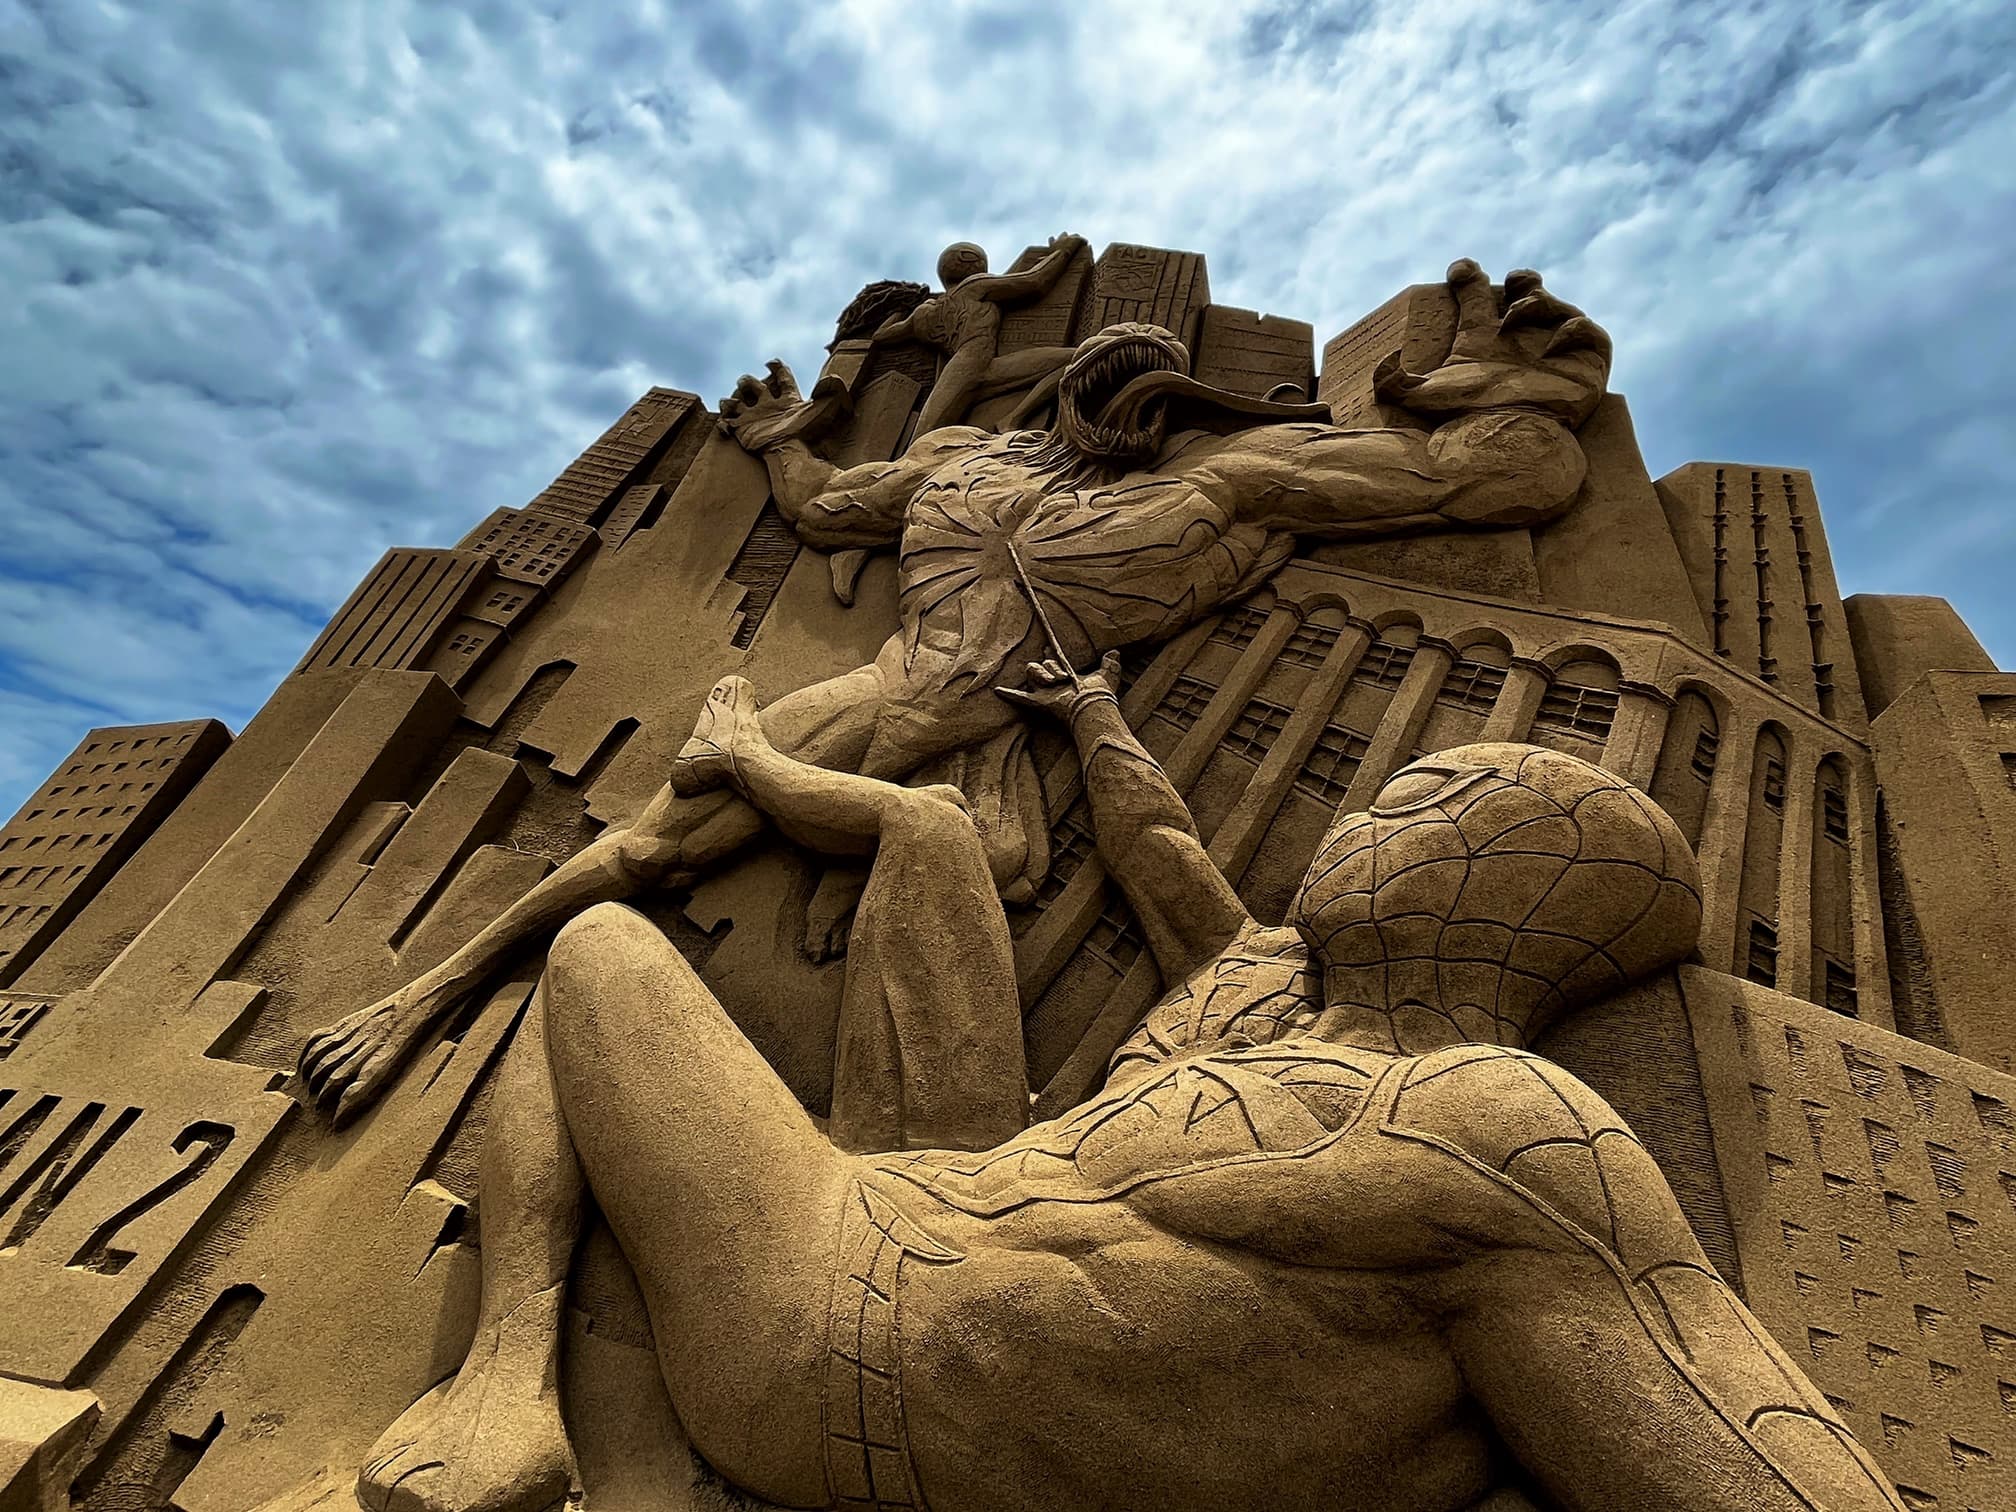 Marvel's Spider-Man 2 Comes to Life in Giant Sand Sculpture in Taiwan